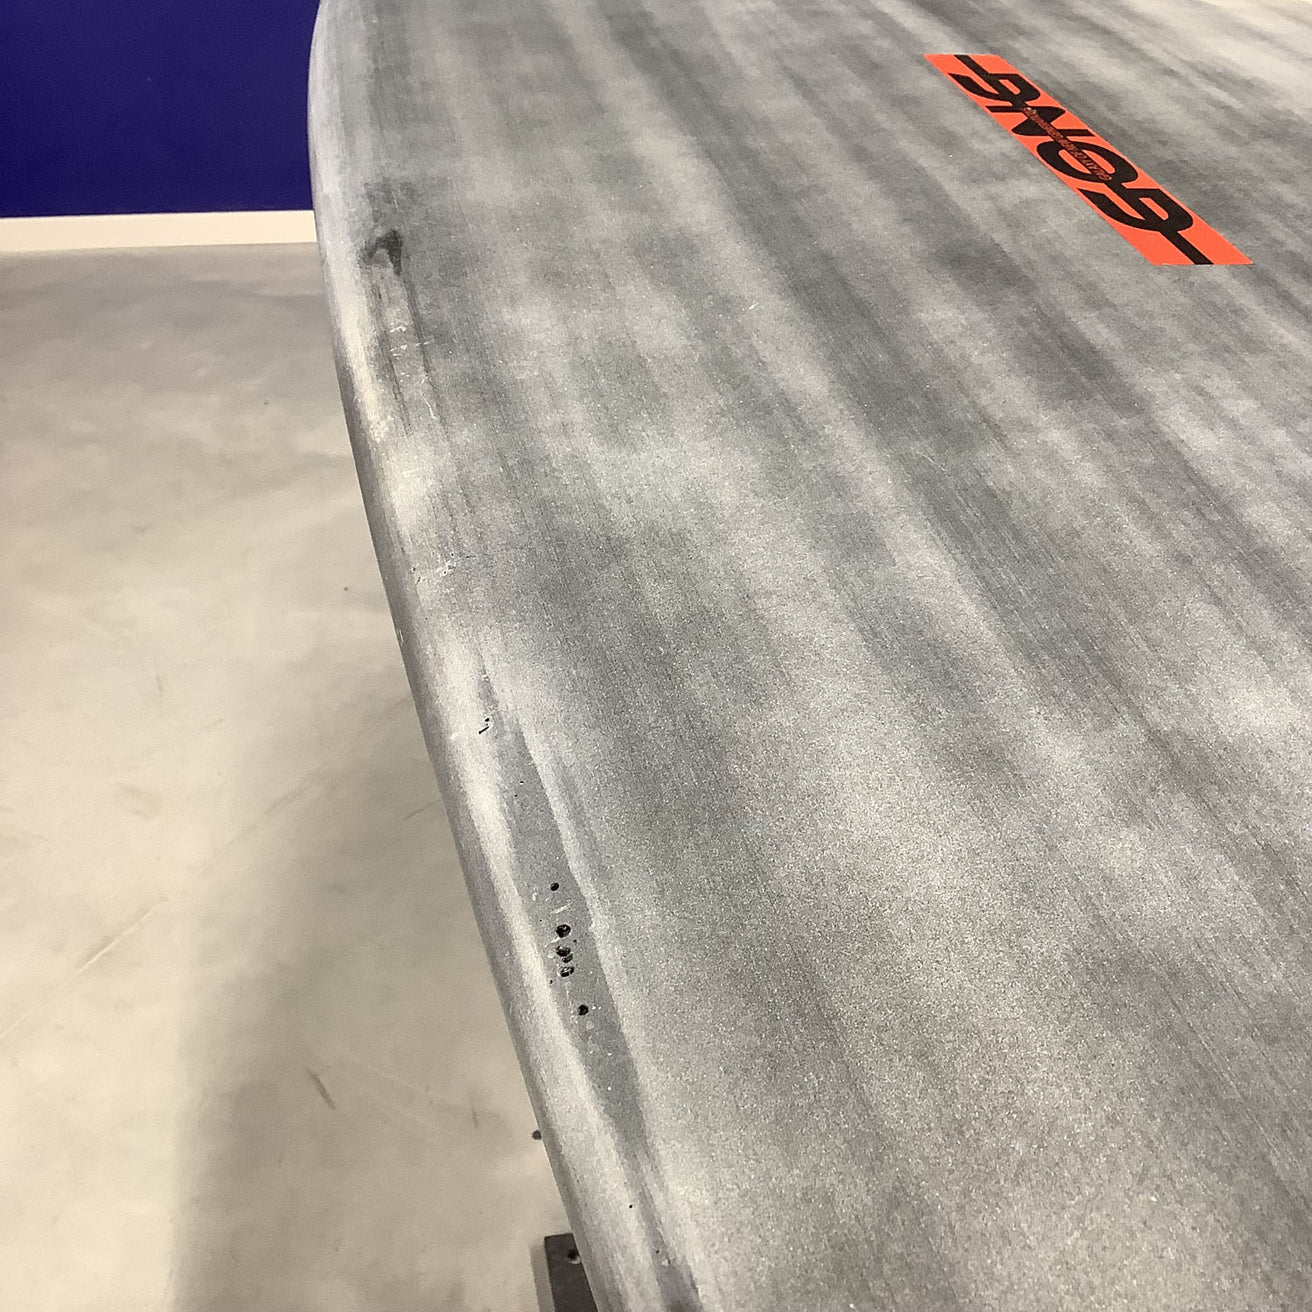 GONG | SUP Curve Sp Pro 7'2 2019 Occasion 4912